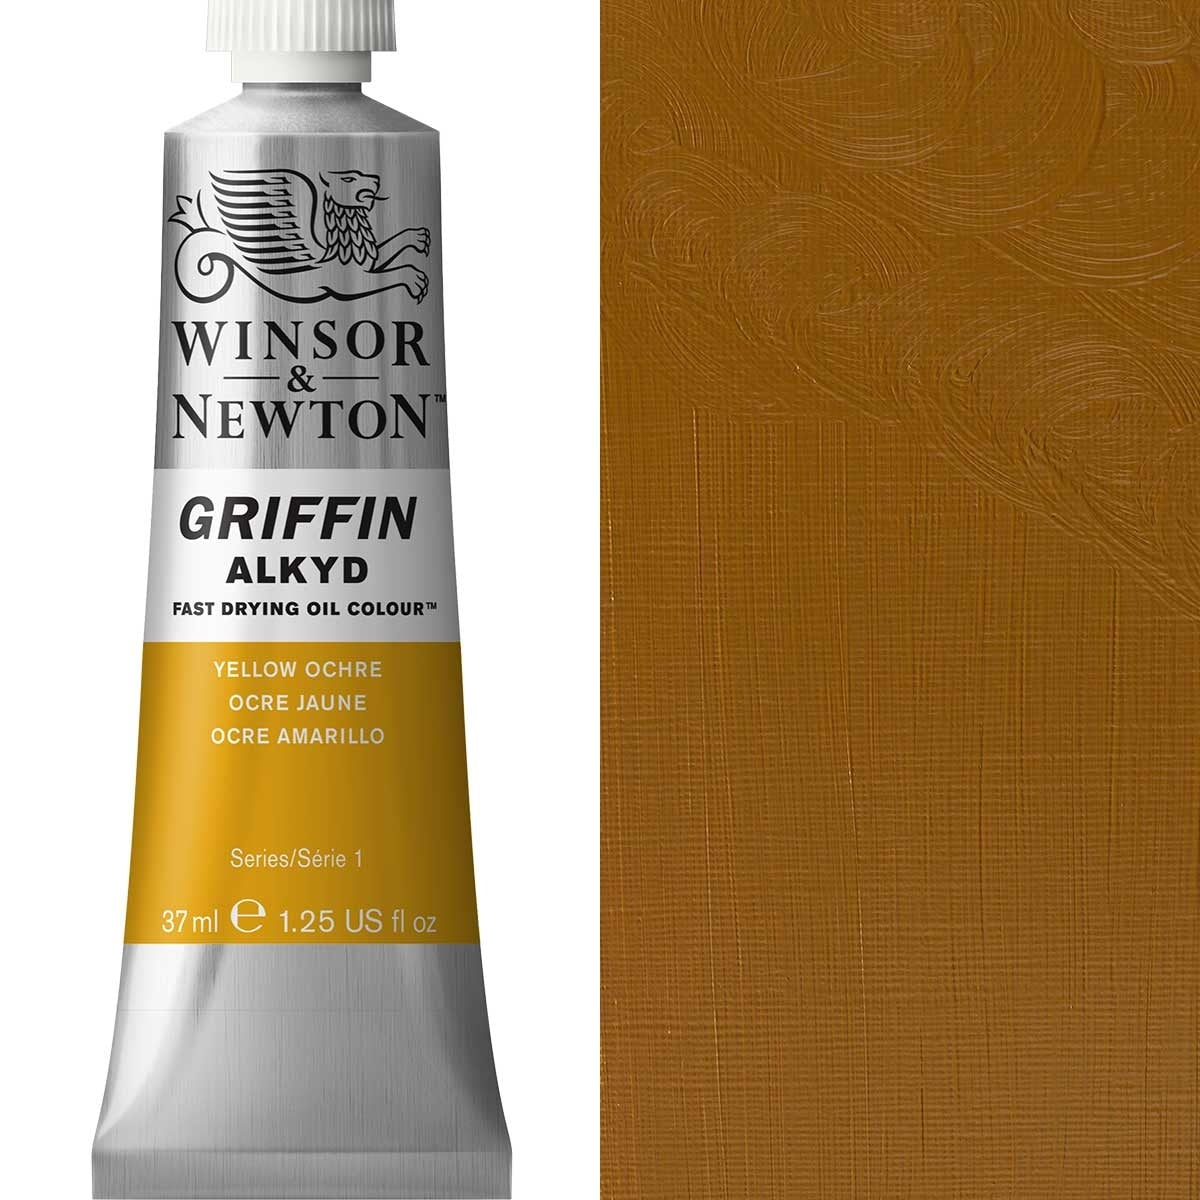 Winsor and Newton - Griffin ALKYD Oil Colour - 37ml - Yellow Ochre